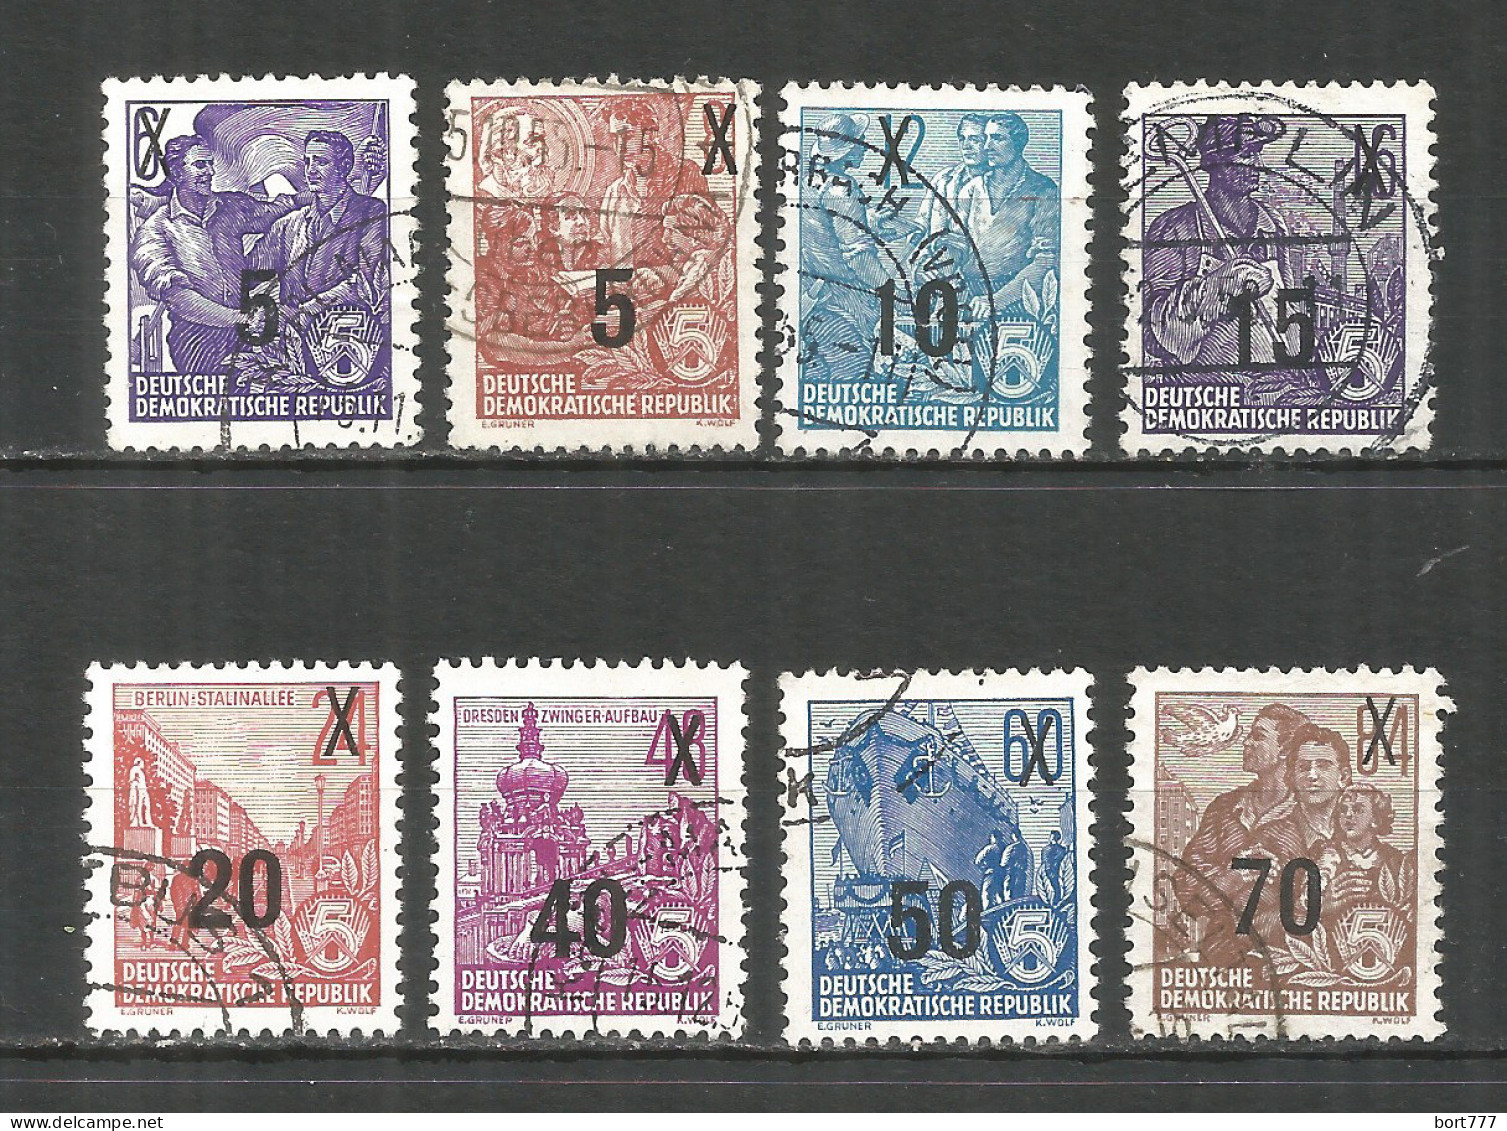 Germany DDR 1954 Year Used Stamps Mi.# 435-442 - Used Stamps